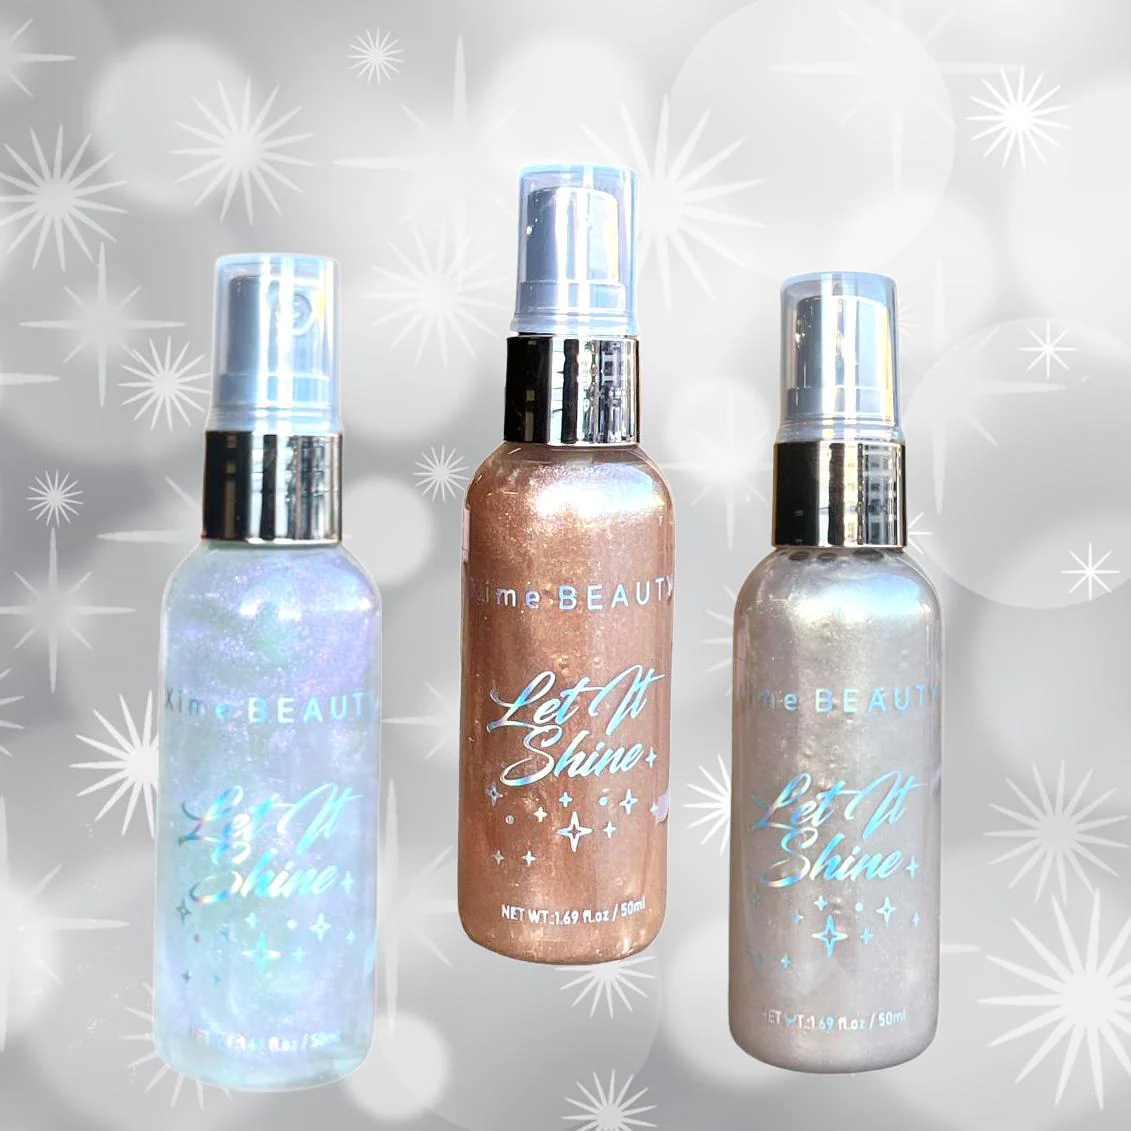 Xime Beauty Let It Shine Body Shimmer Trio